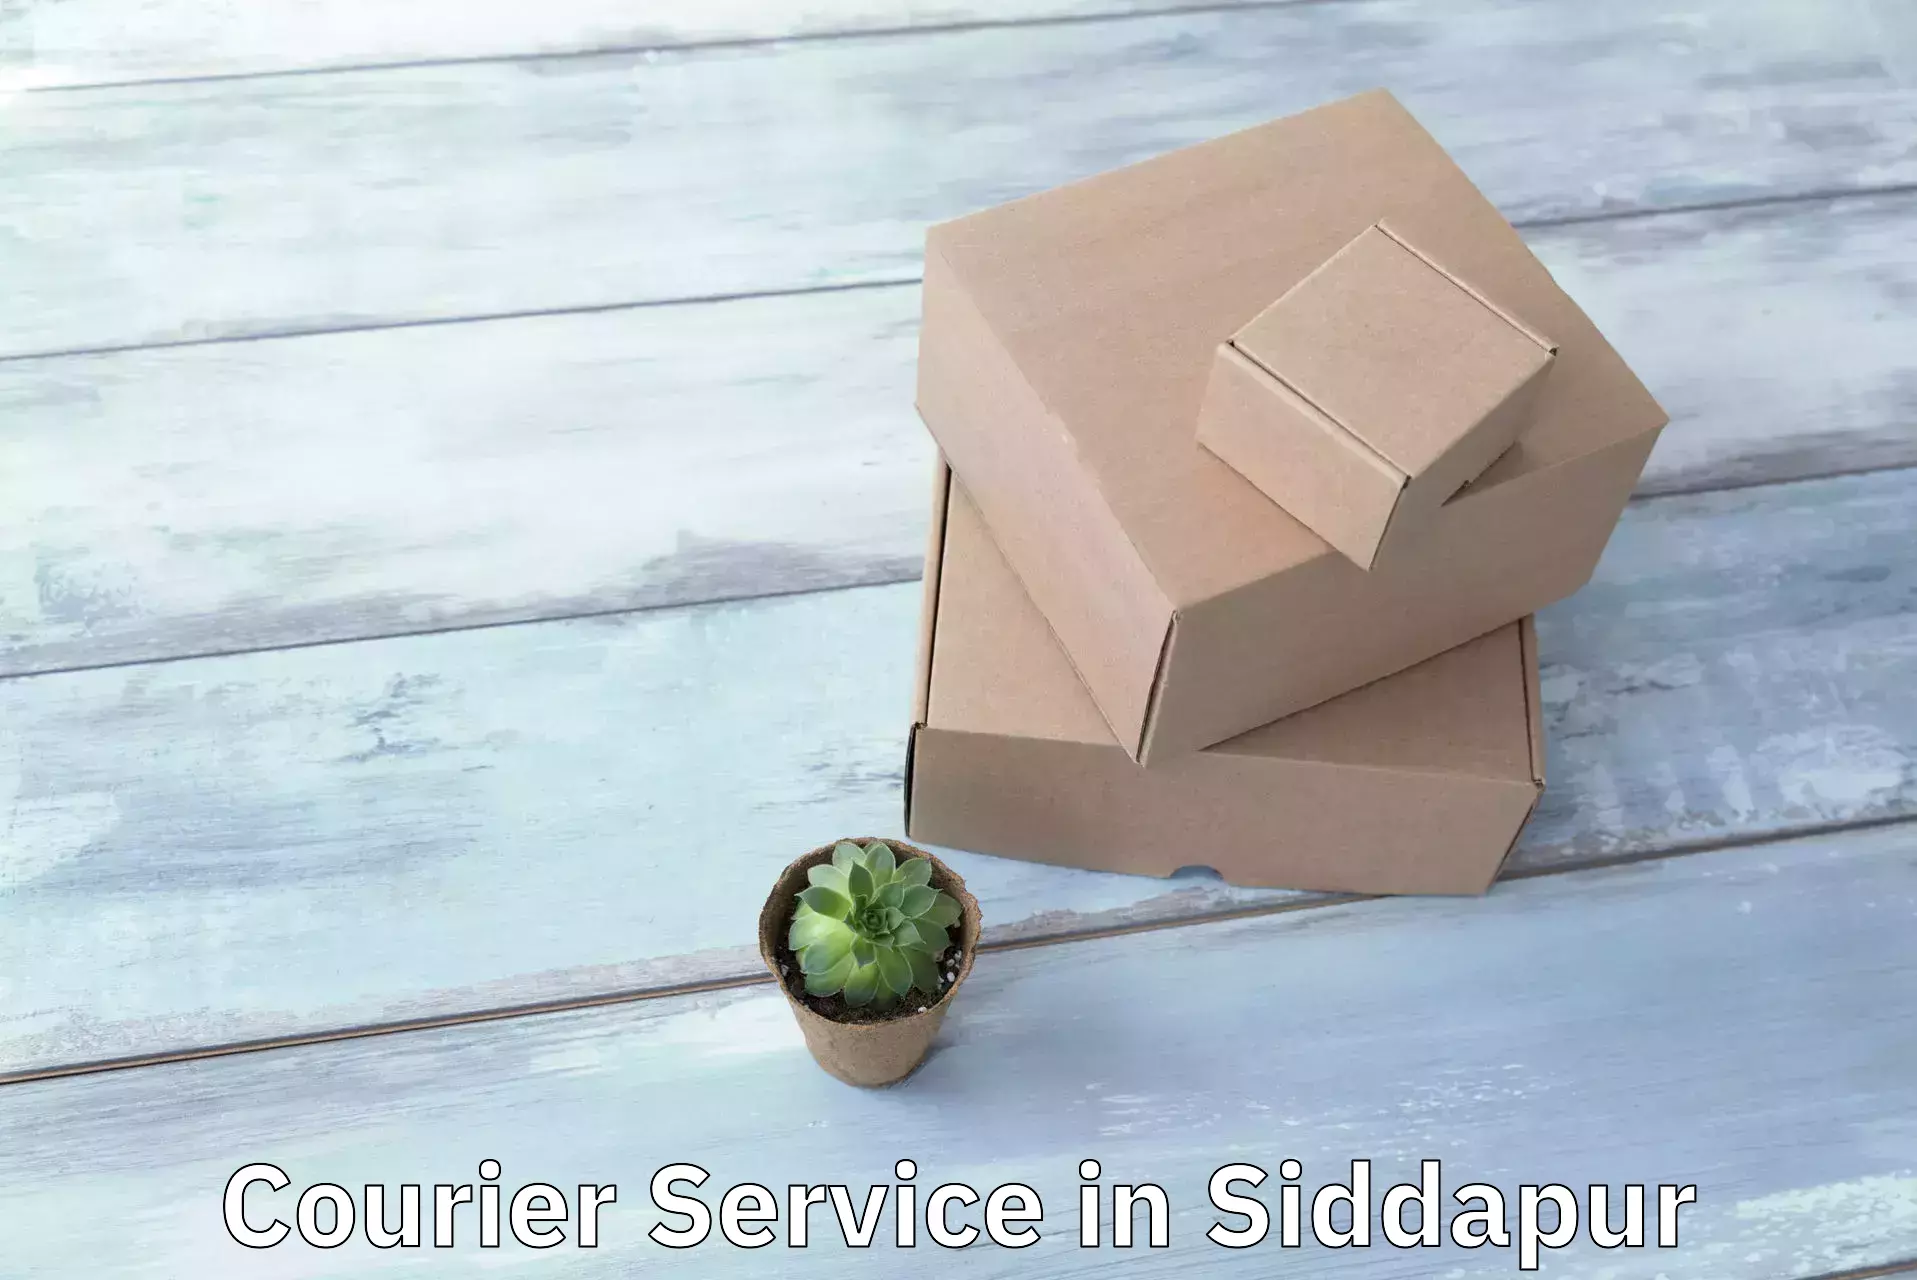 Next-day delivery options in Siddapur